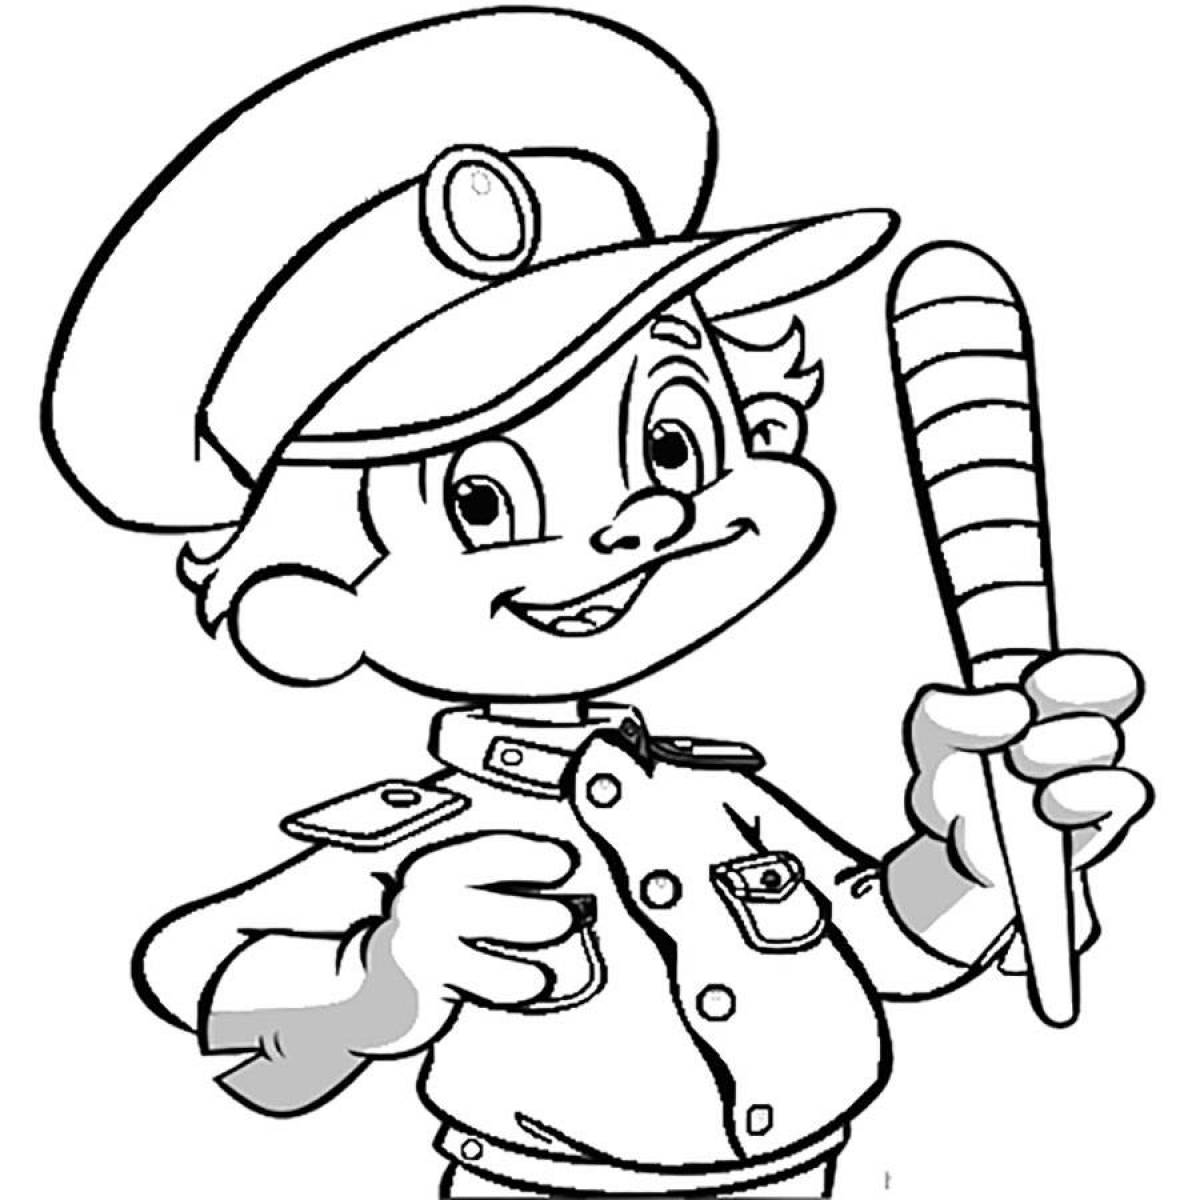 Cop coloring for kids